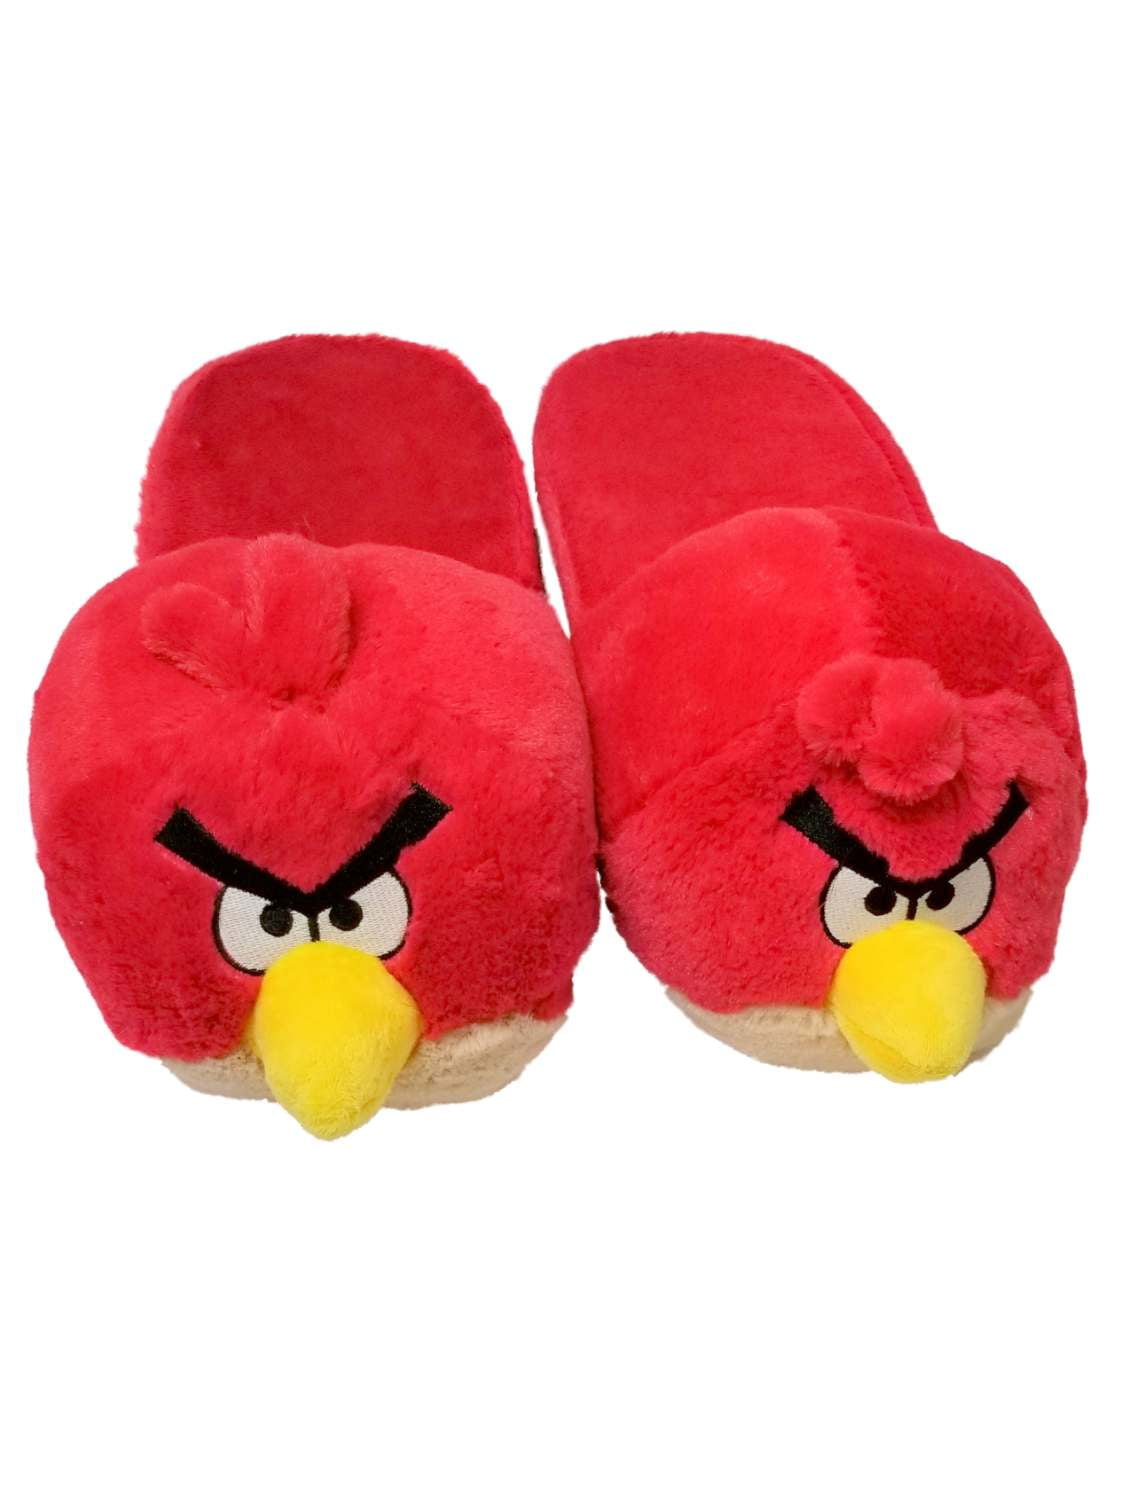 Mens Red Angry Birds Slippers Scuffs 